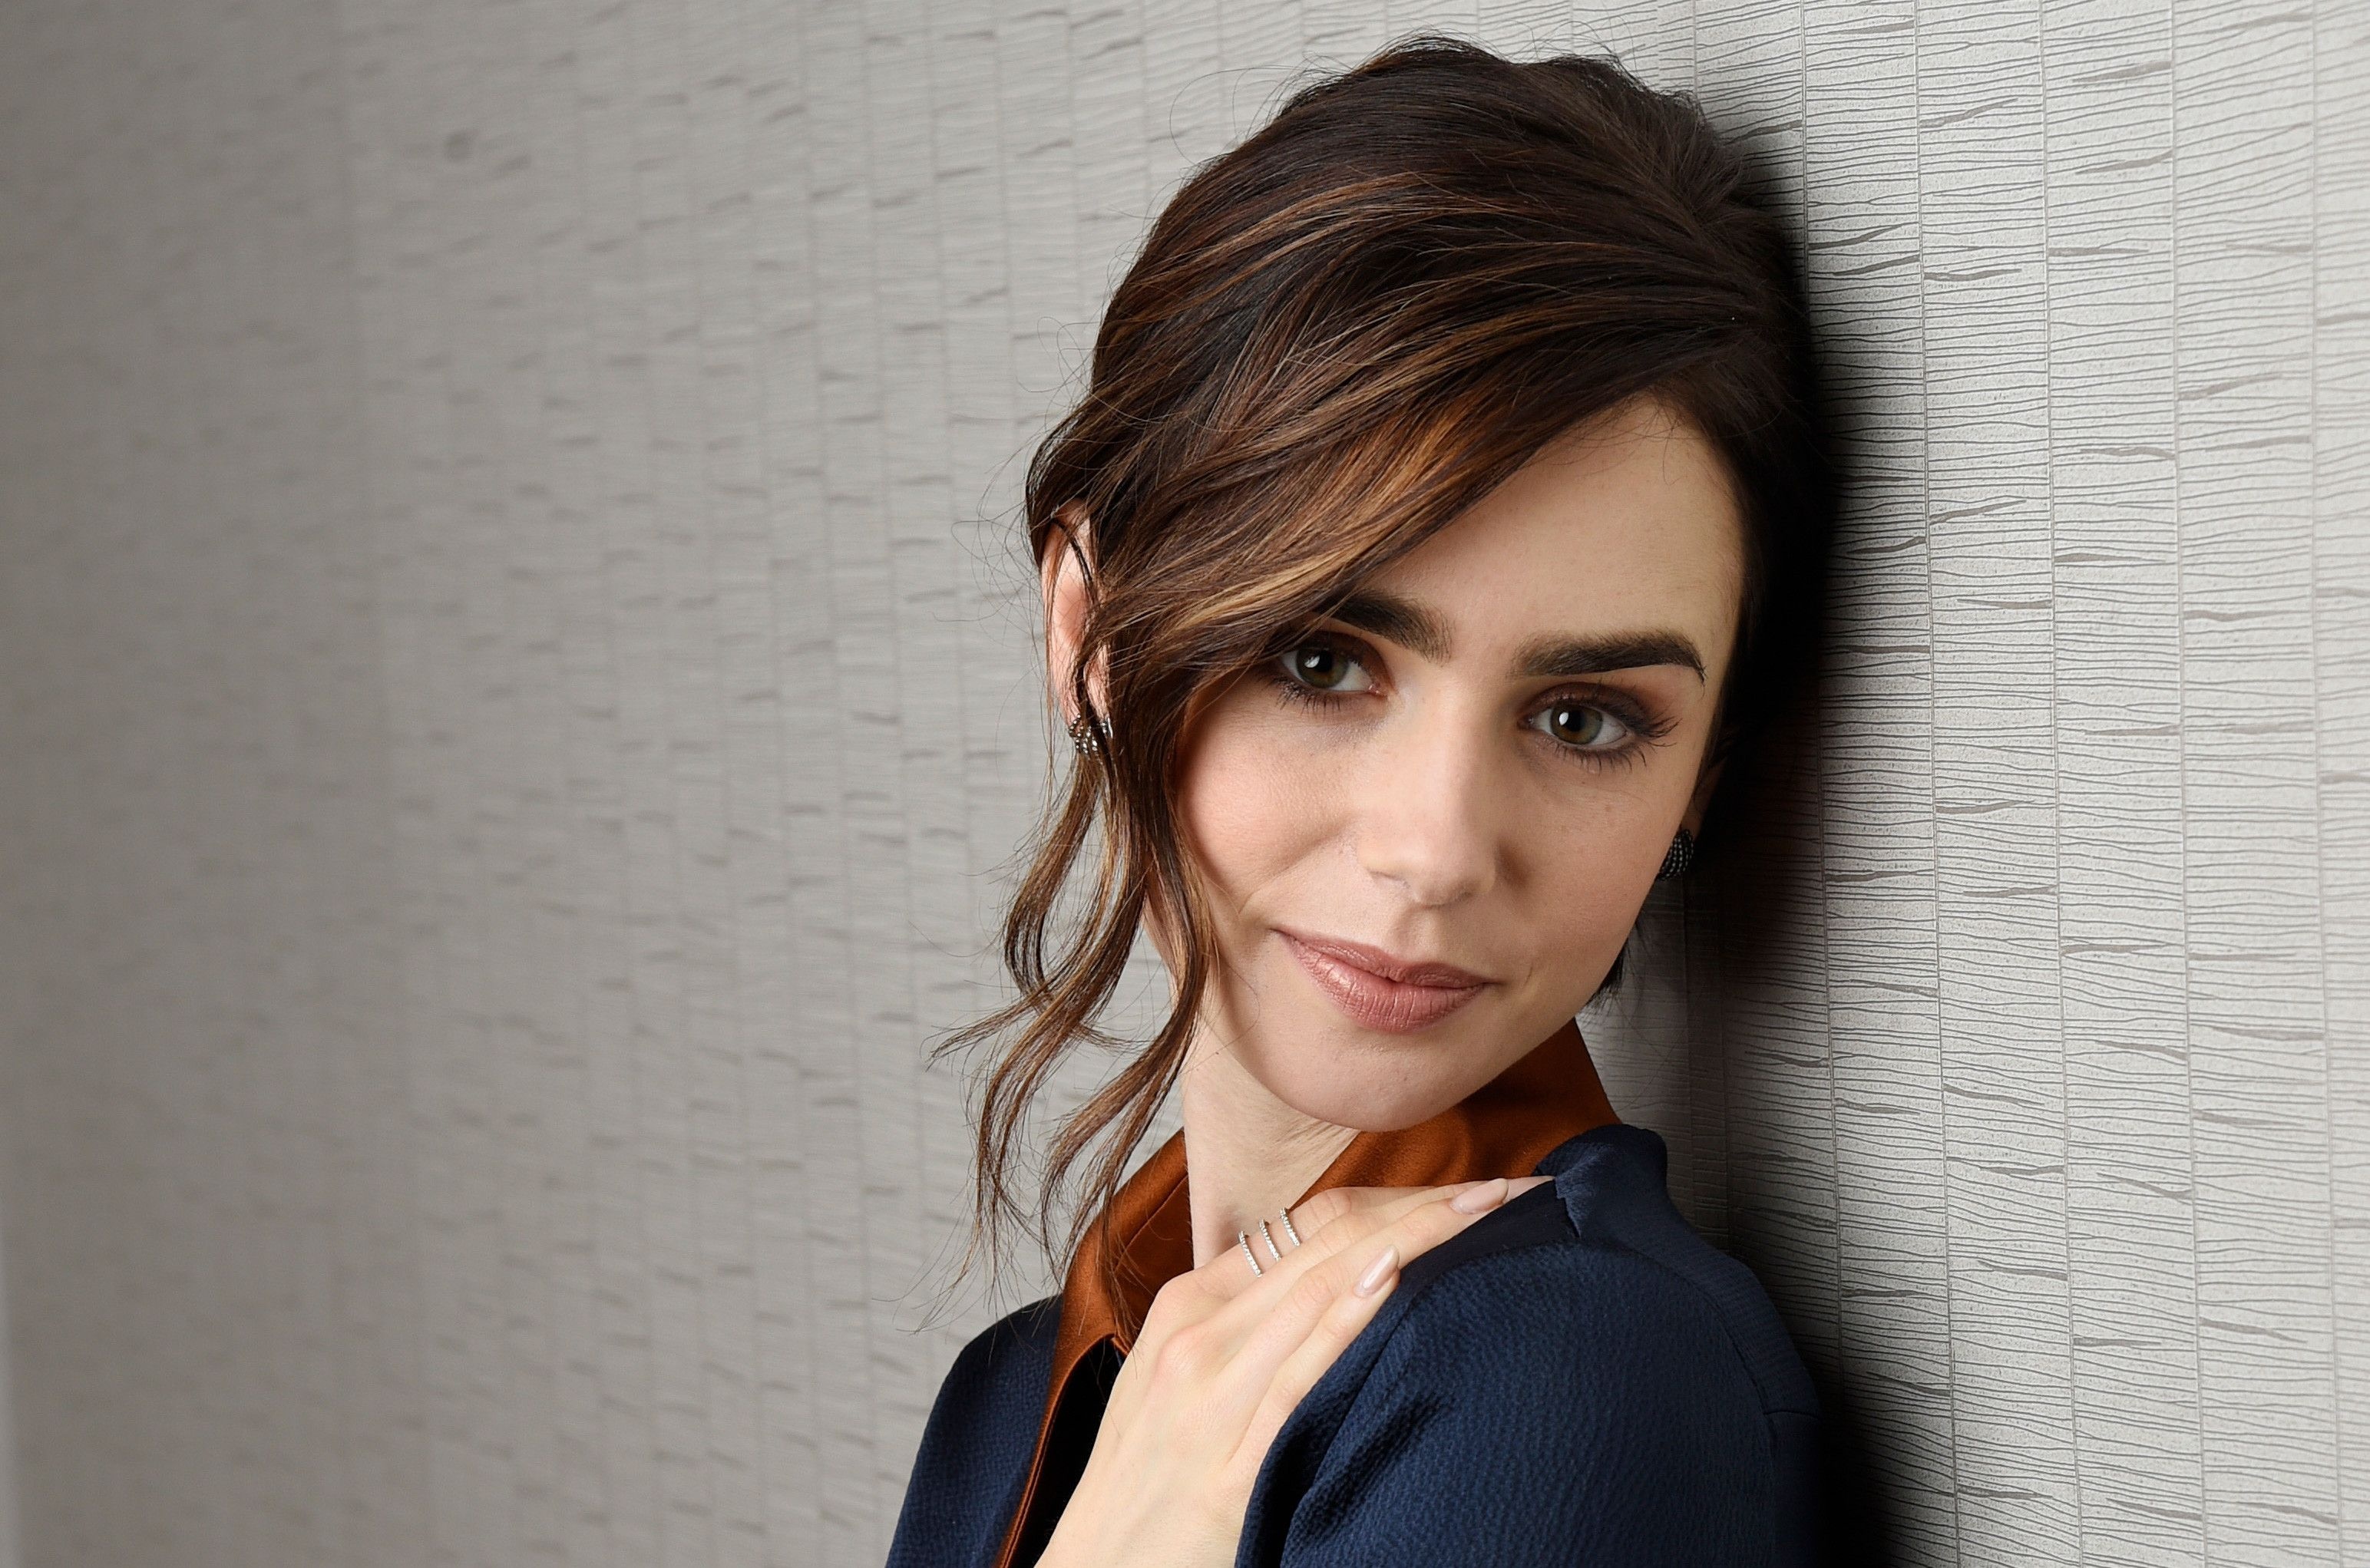 Lily Collins movies, Top-rated actress, Stunning desktop, Alluring backgrounds, 3090x2050 HD Desktop